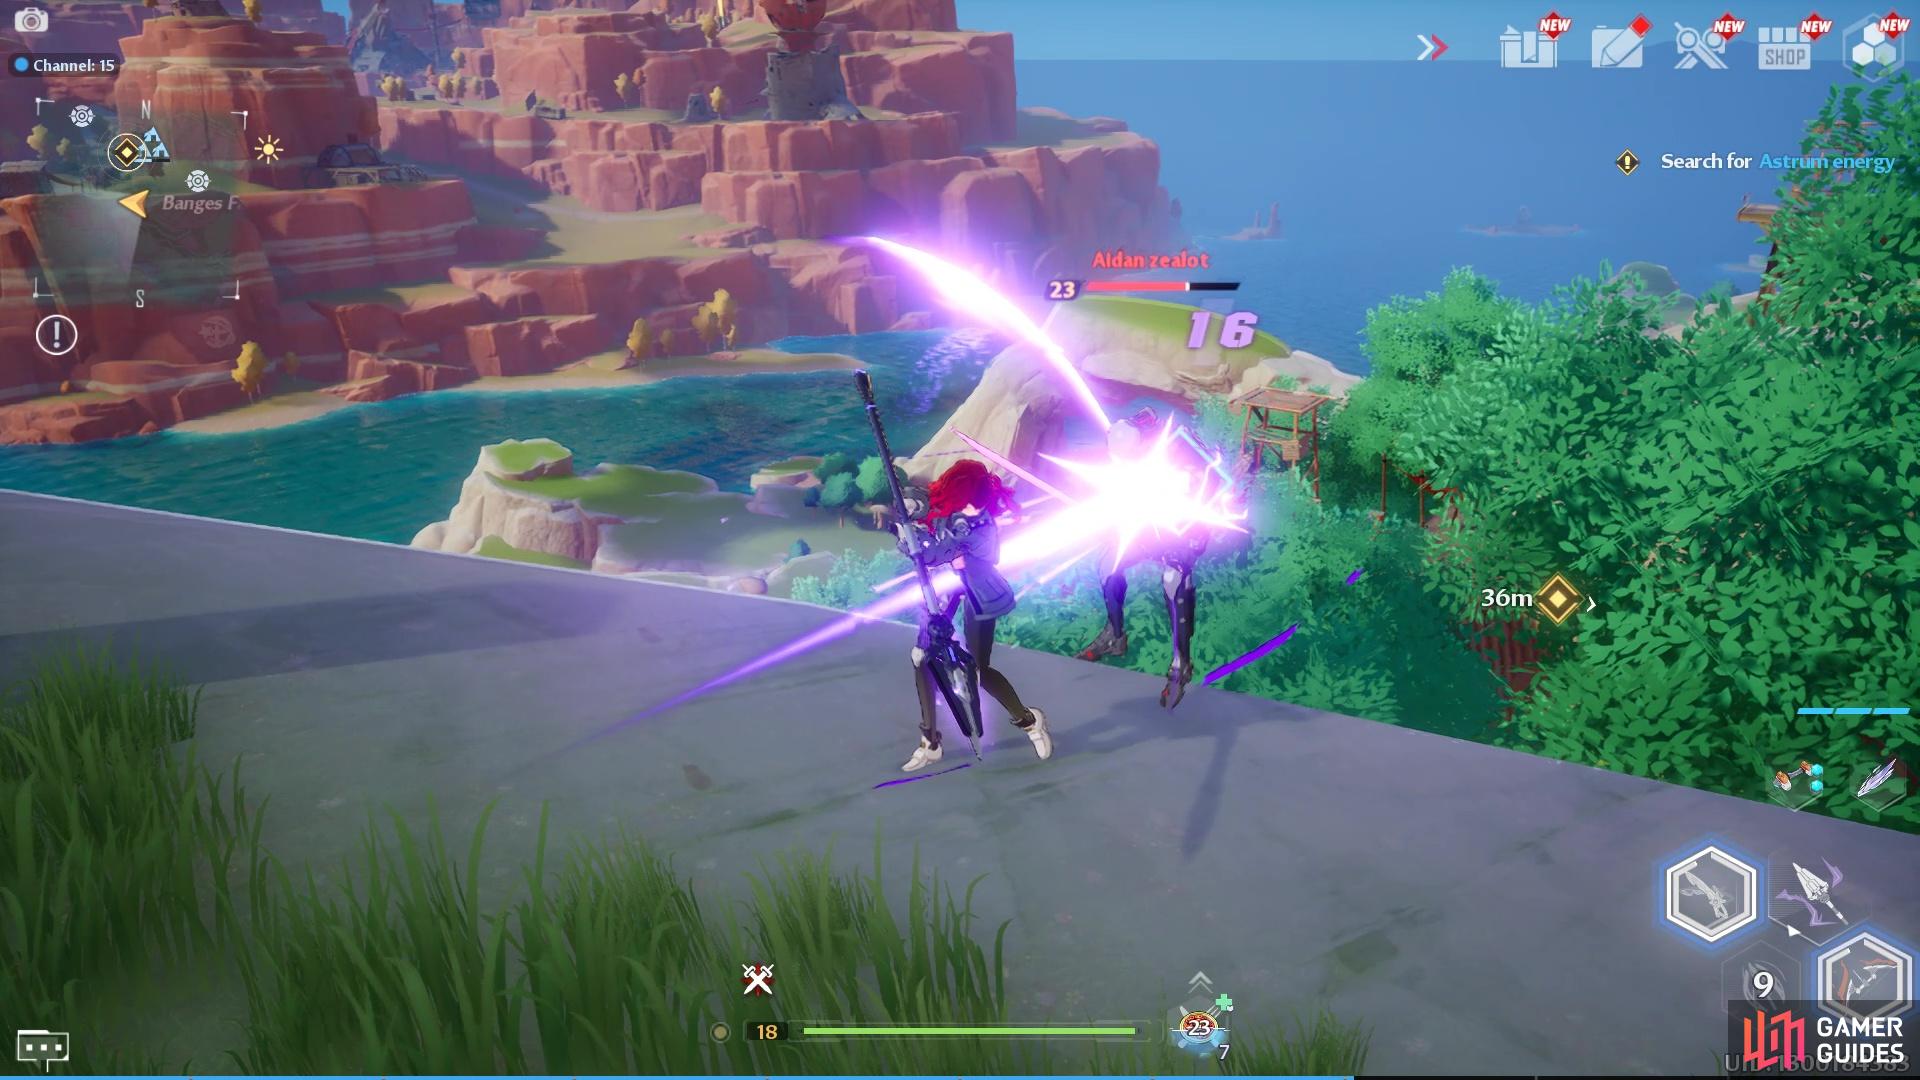 Take some of the enemies to near the cliff and push them off to save yourself a battle